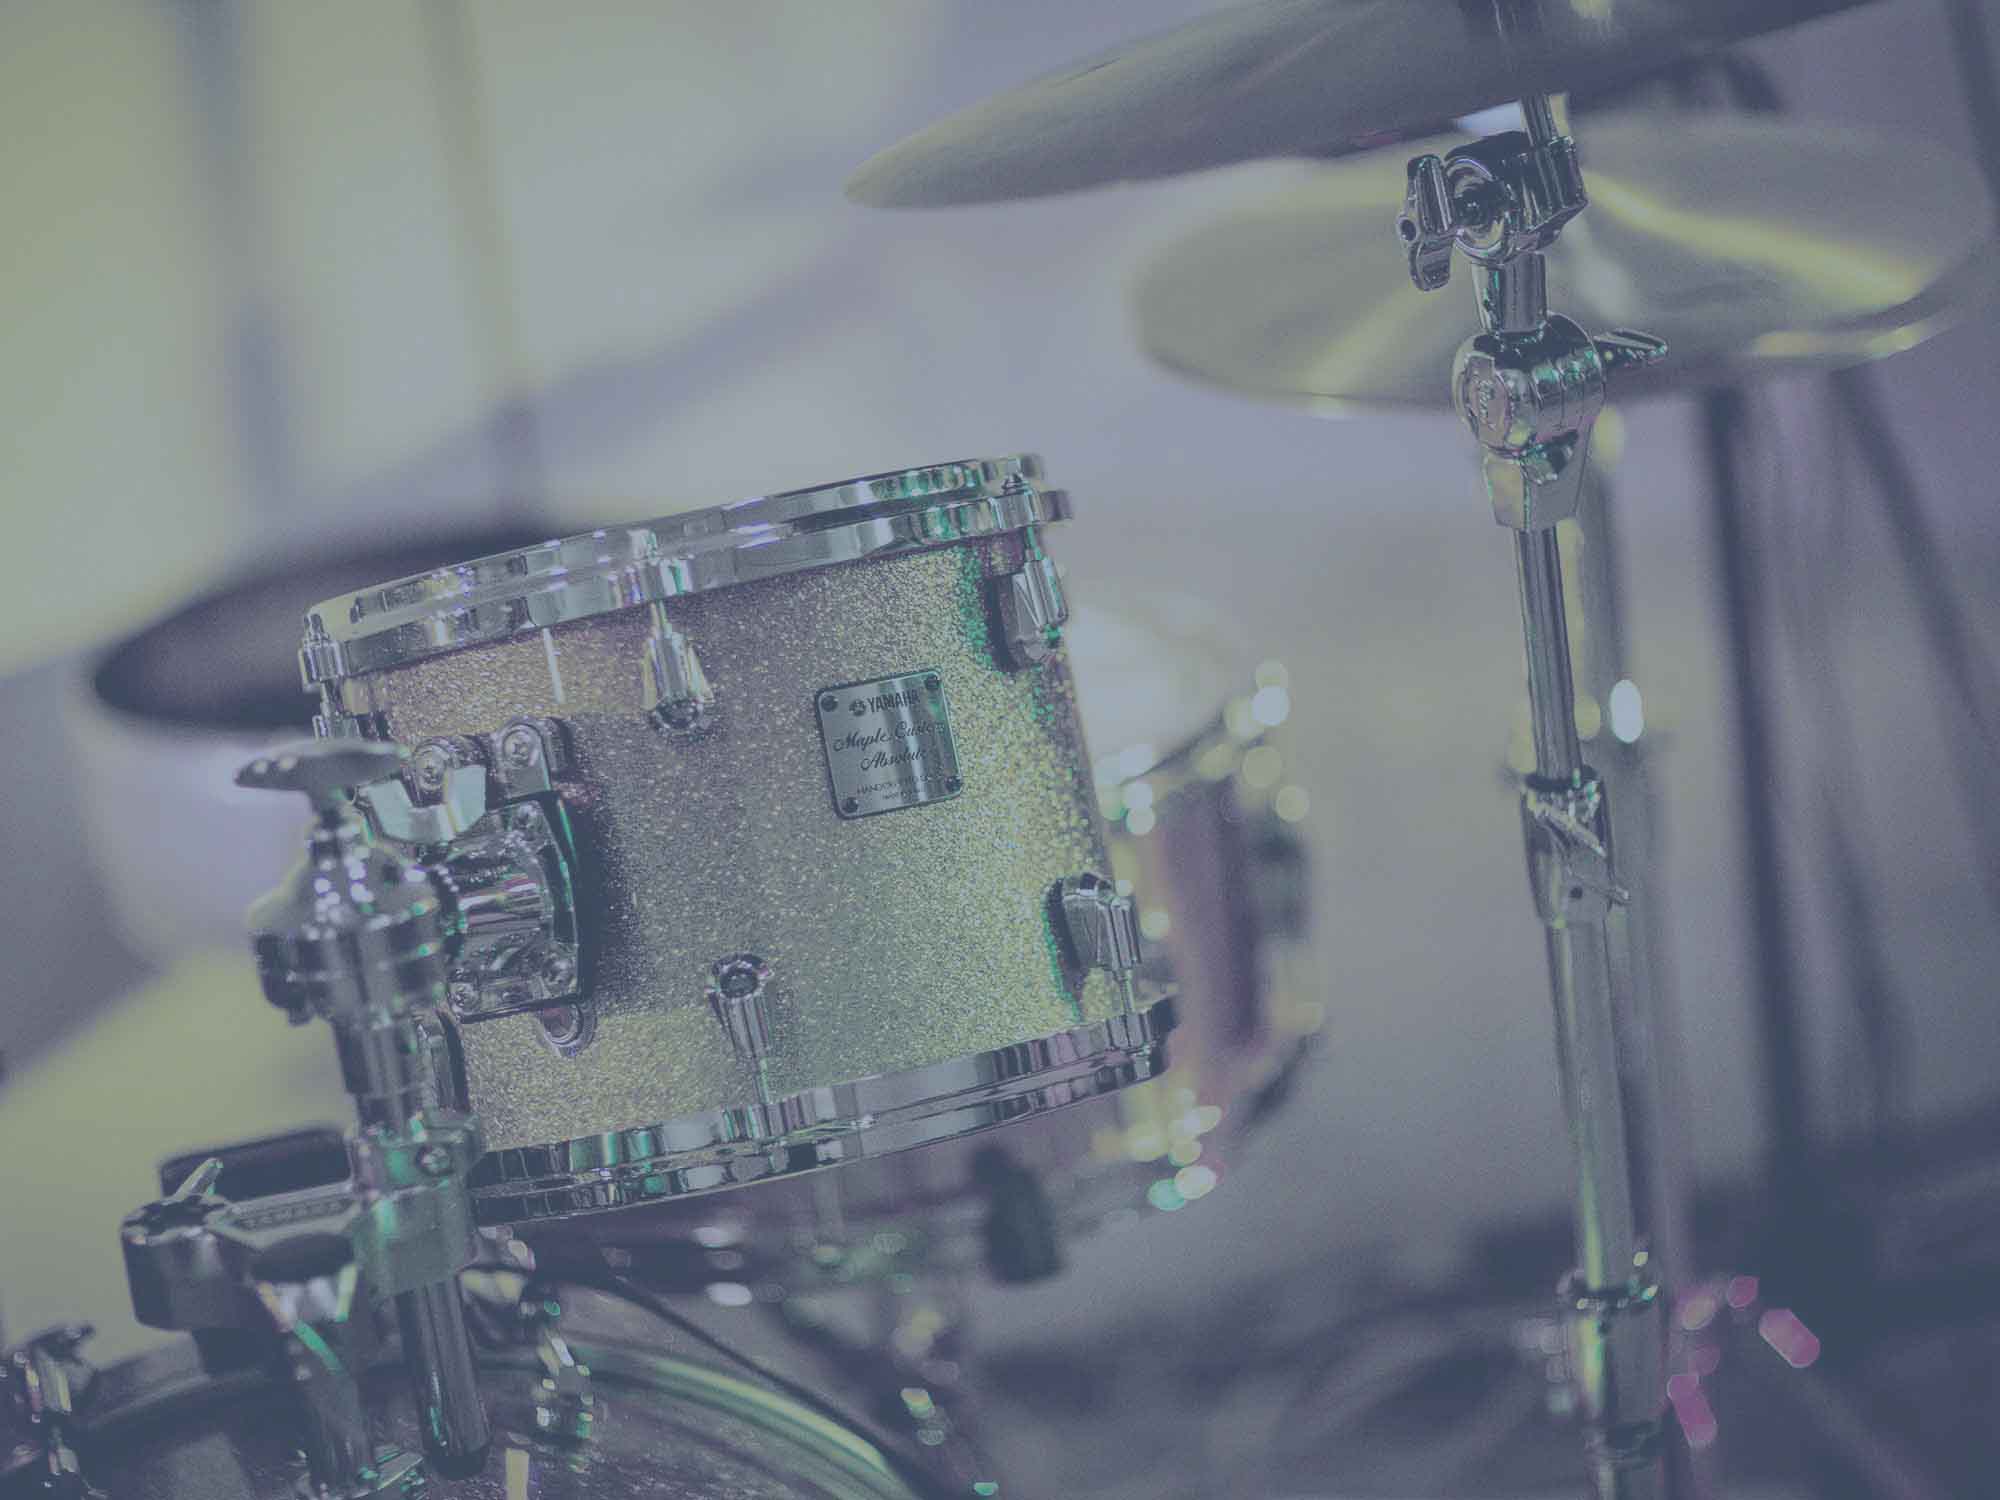 3 Reasons why Indoor Ensembles raise WAY MORE money with FansRaise